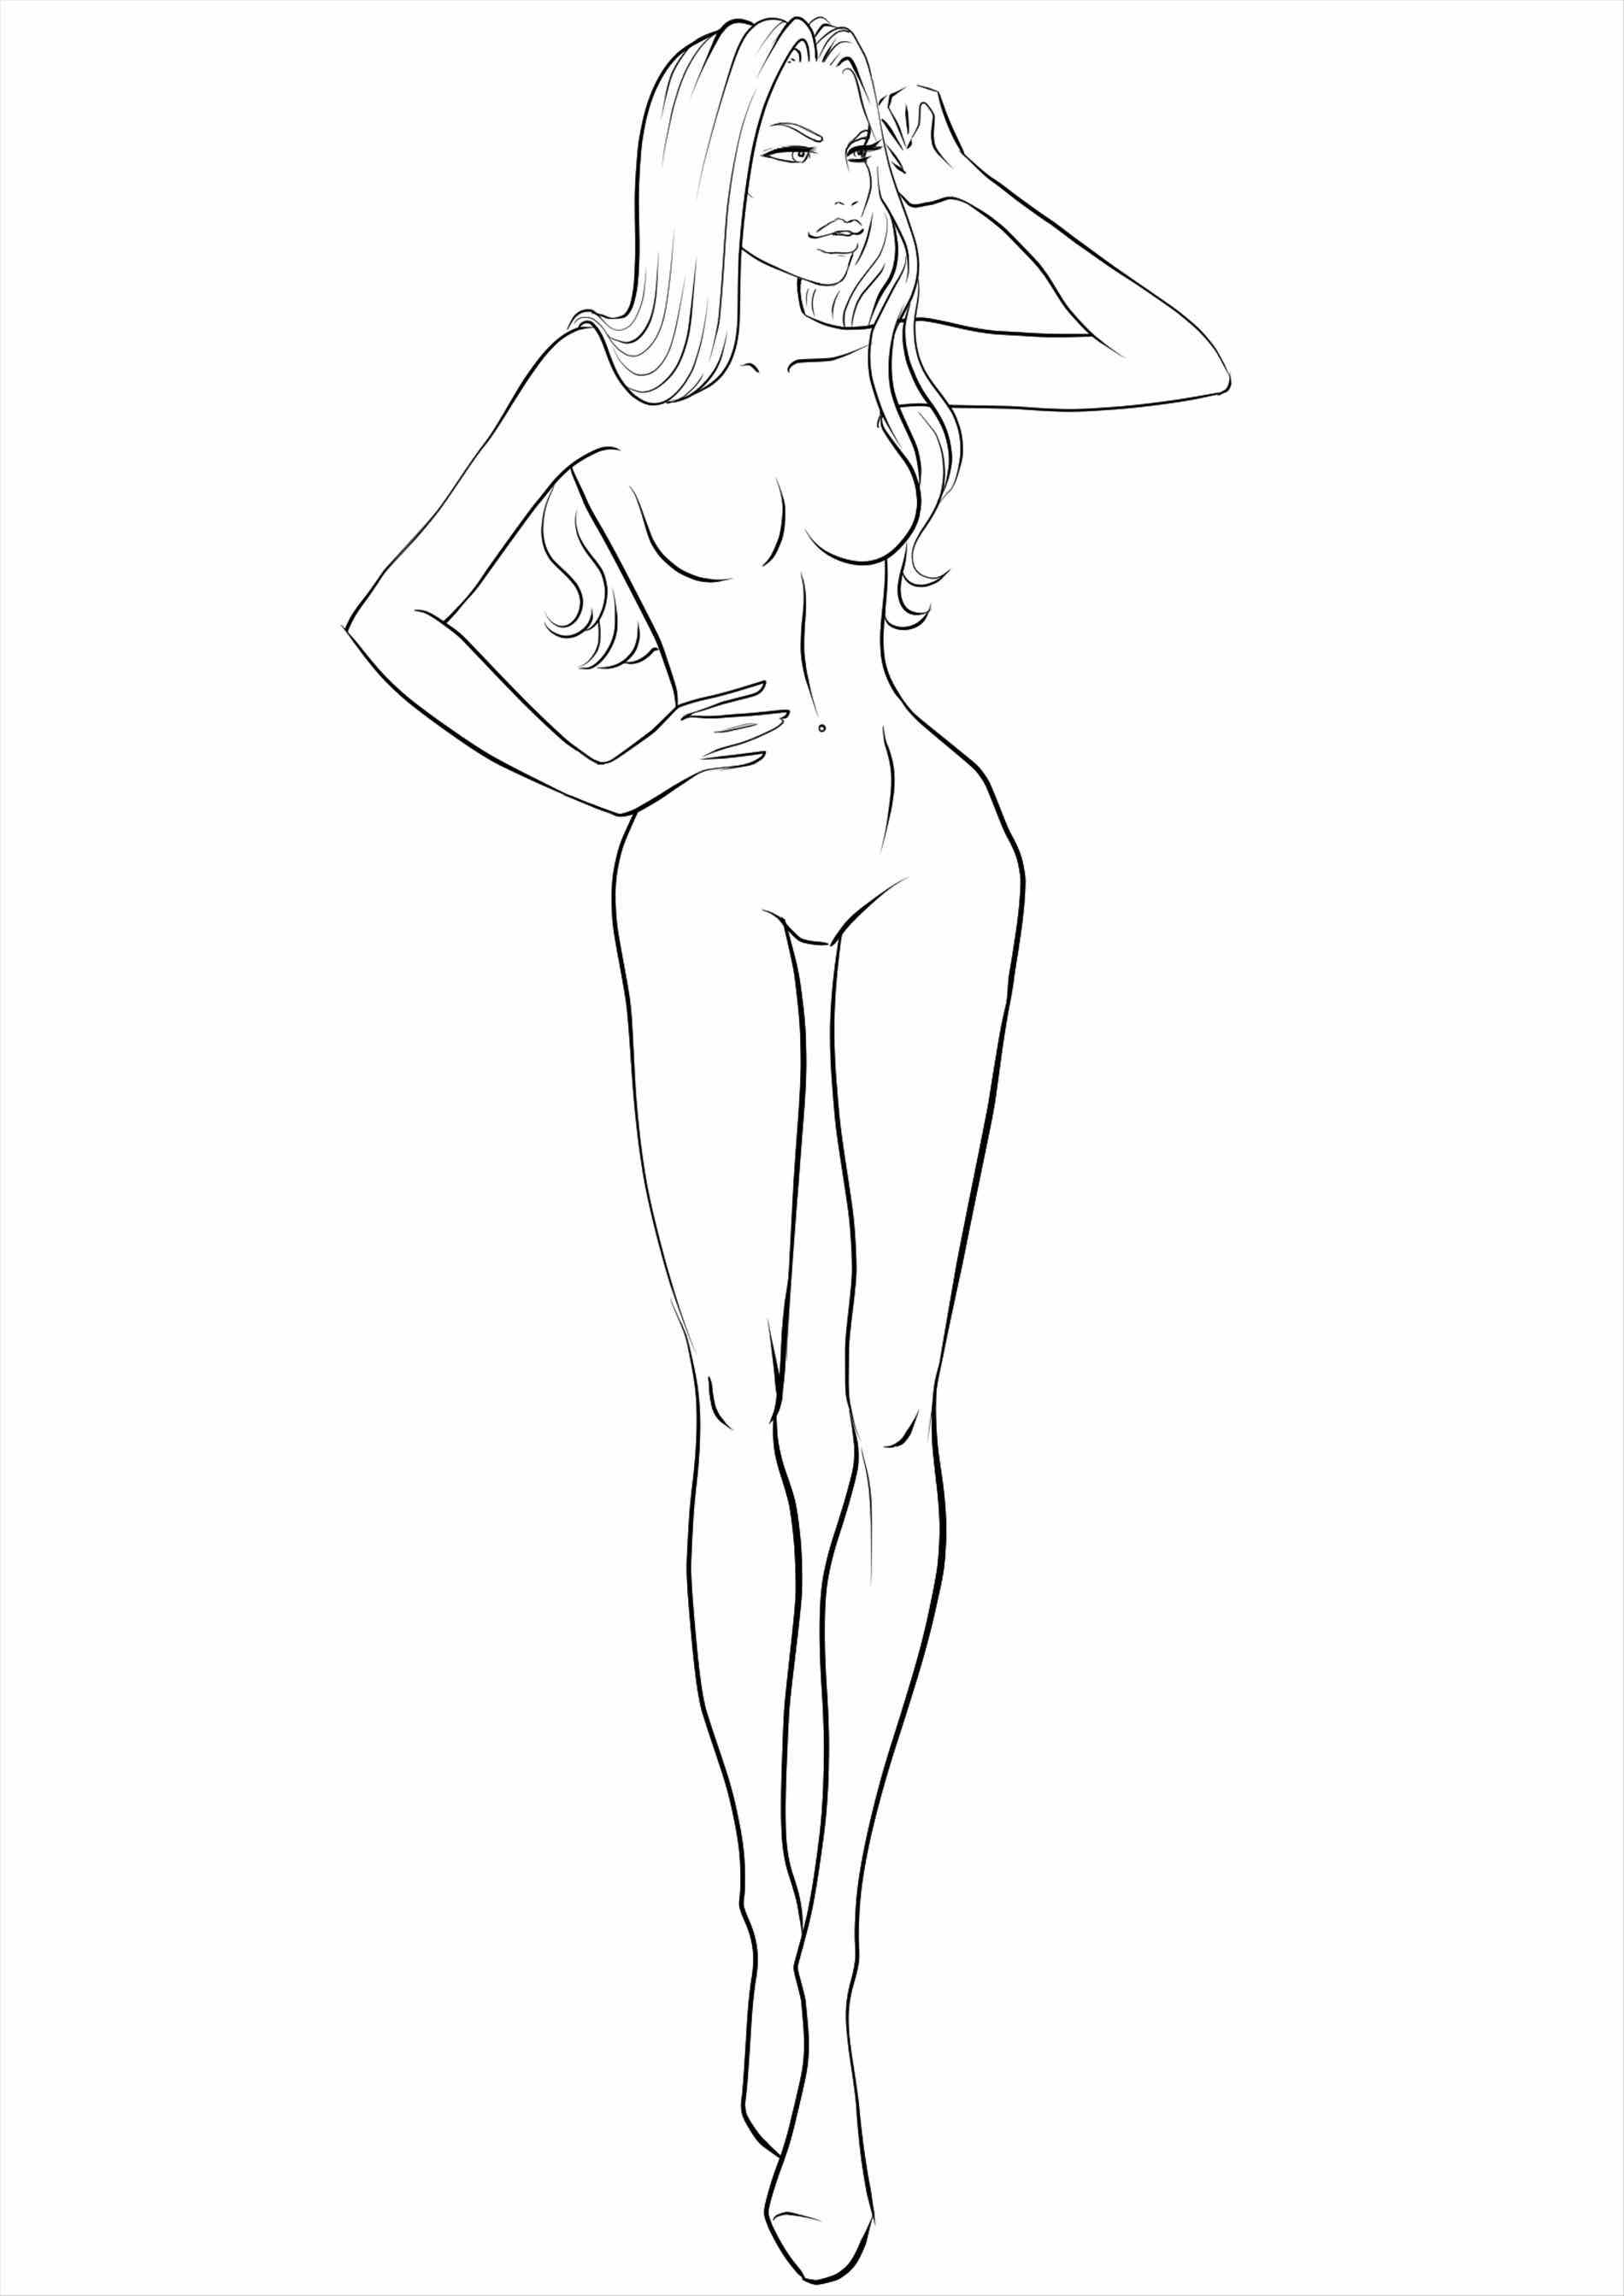 Fashion Model Figure Drawing at GetDrawings.com | Free for personal ...